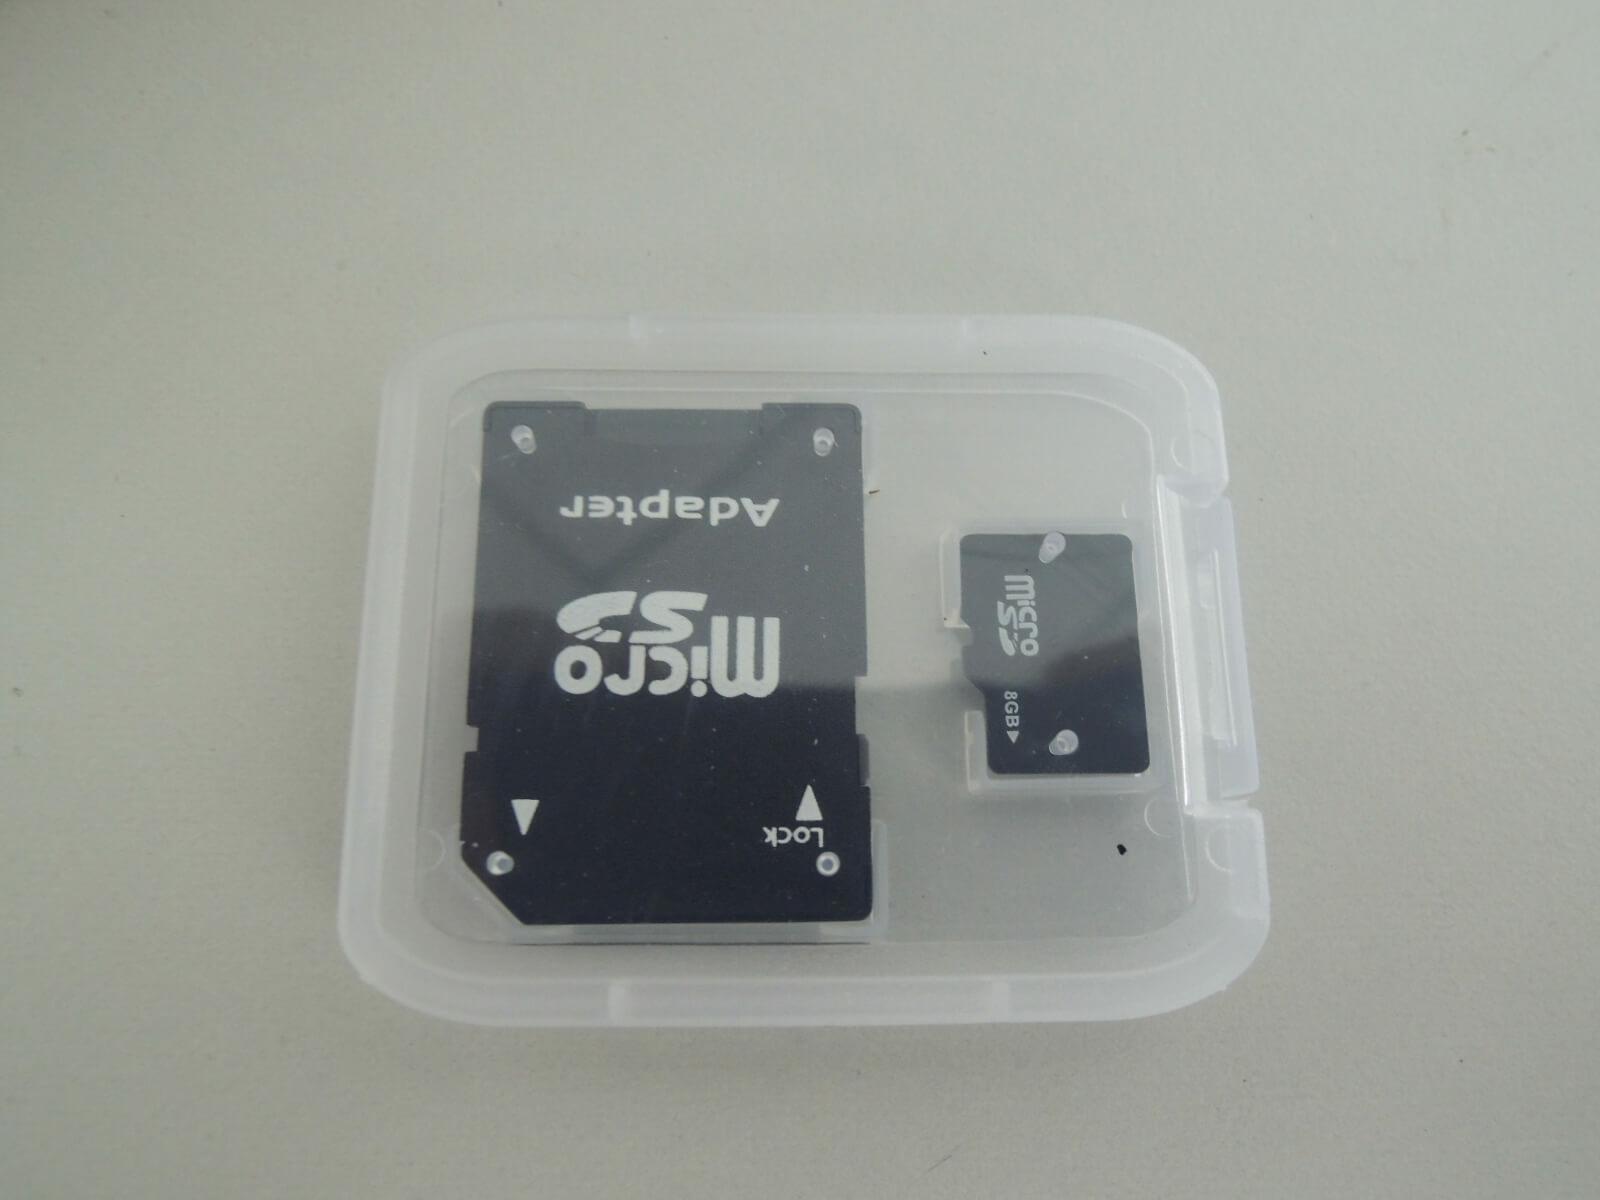 MicroSD card with adapter